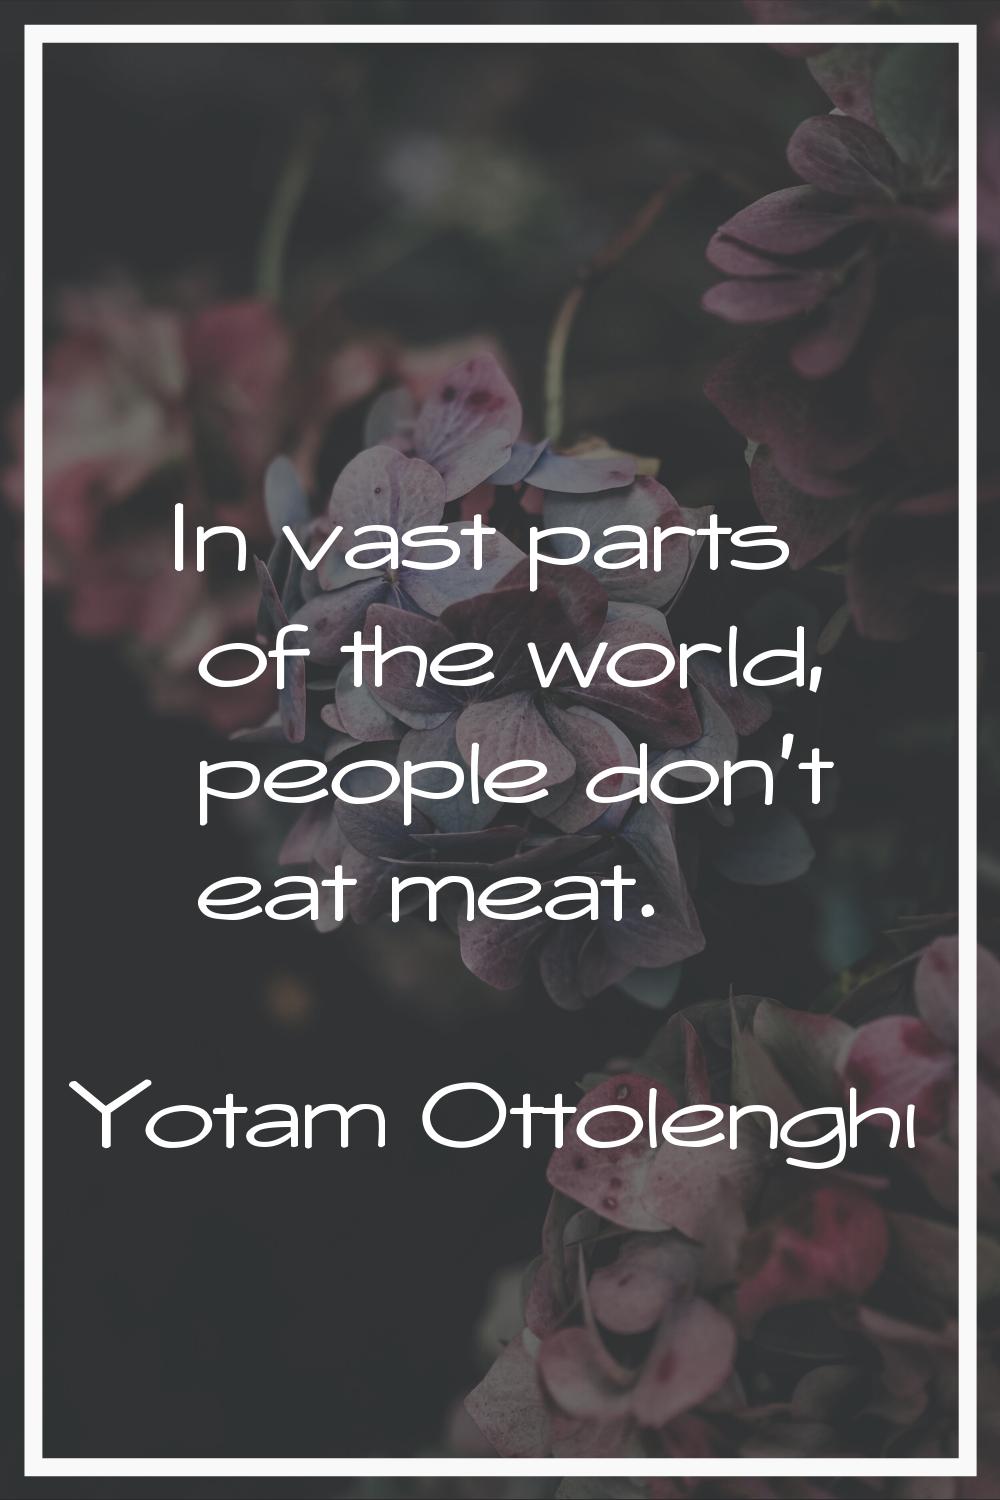 In vast parts of the world, people don't eat meat.